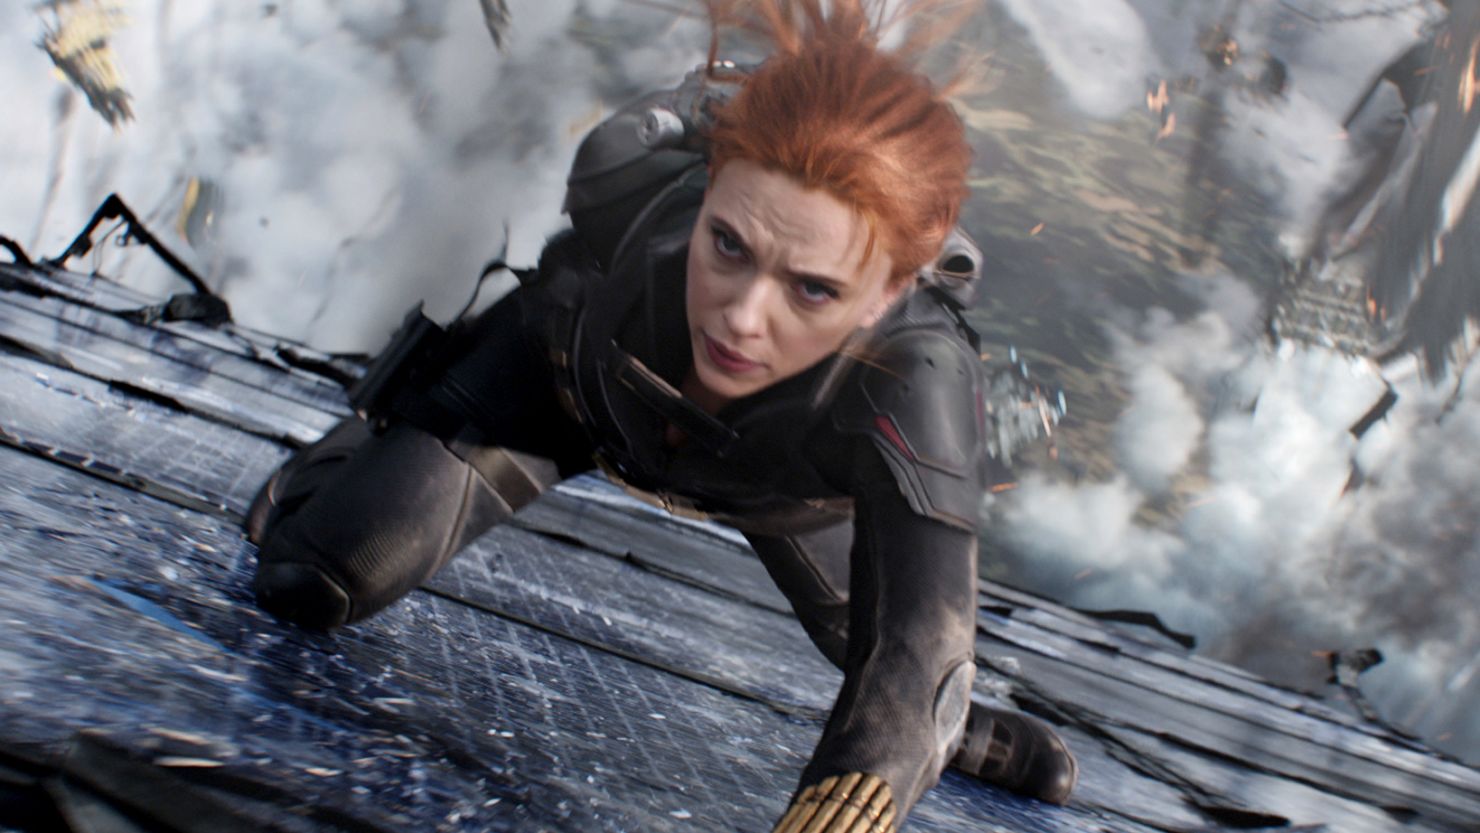 Scarlett Johansson stars in 'Black Widow,' as Marvel transitions into its next phase.